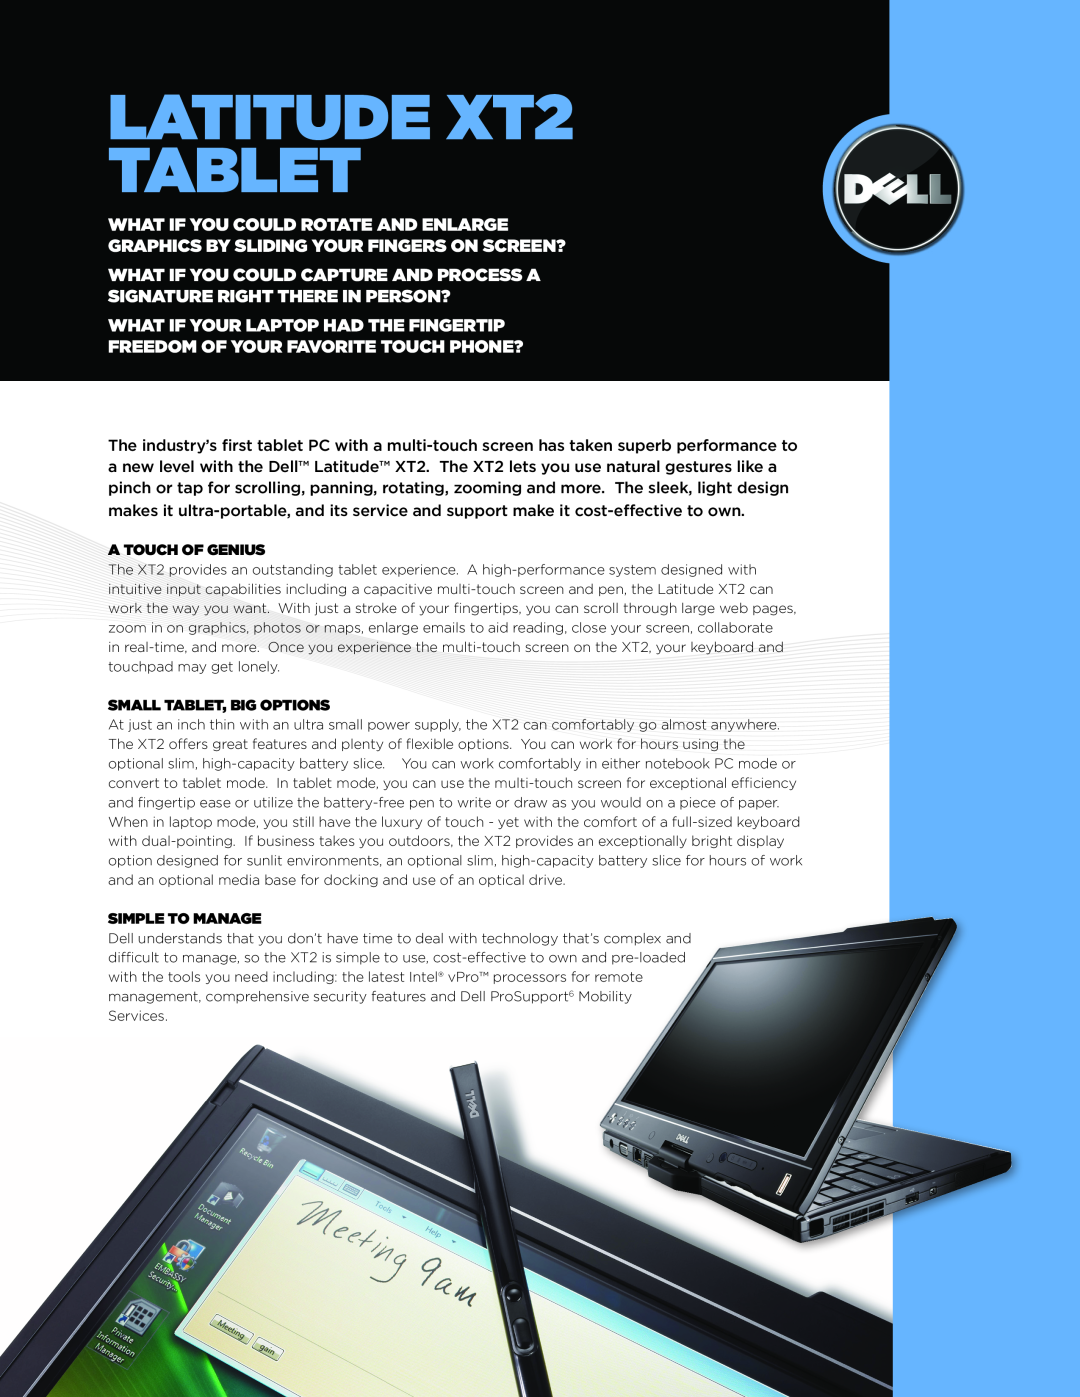 Dell manual LATITUDE XT2 TABLET, A Touch Of Genius, Small Tablet, Big Options, Simple To Manage 